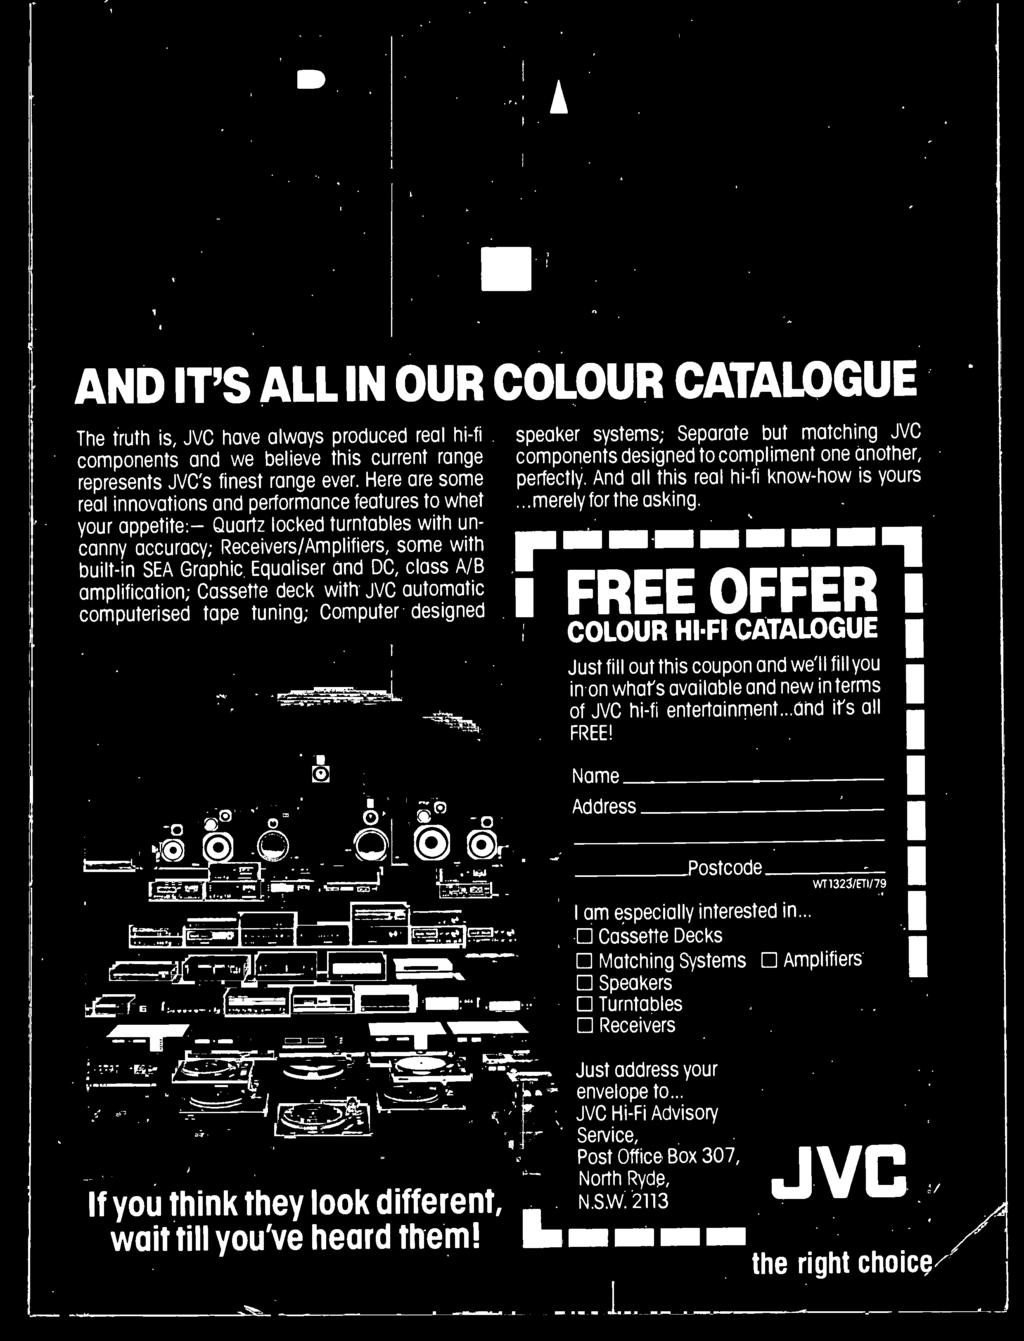 1 FREE OFFER 1 I COLOUR HIFI CATALOGUE Just fill out this coupon and we'll fill you in on what's available and new in terms of JVC hi-fi entertainment.. and it's all FREE!